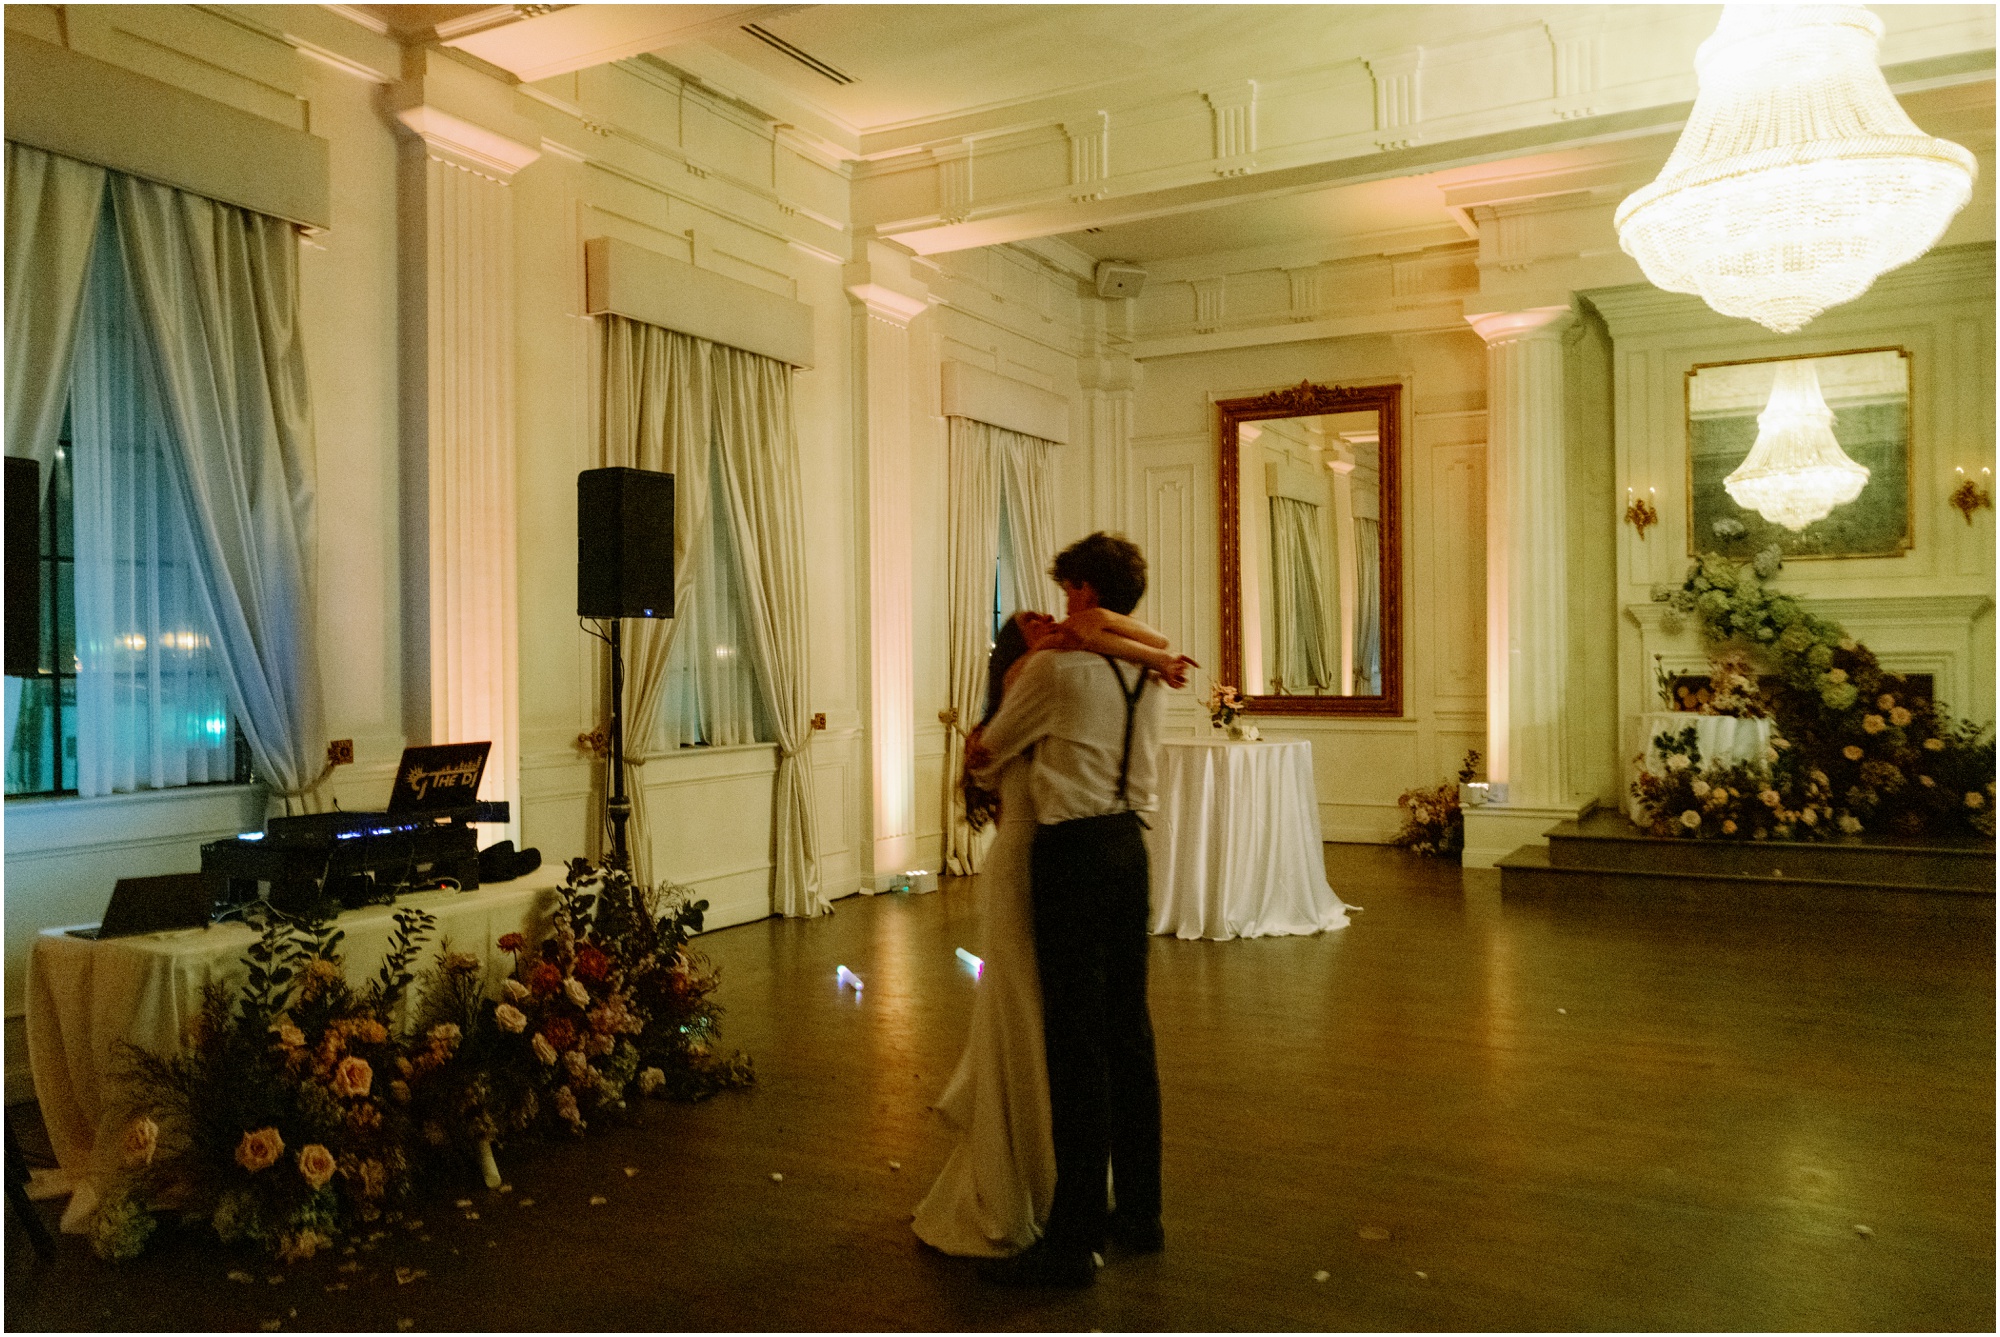 Bride and groom enjoying their last dance at their wedding under ambient light.